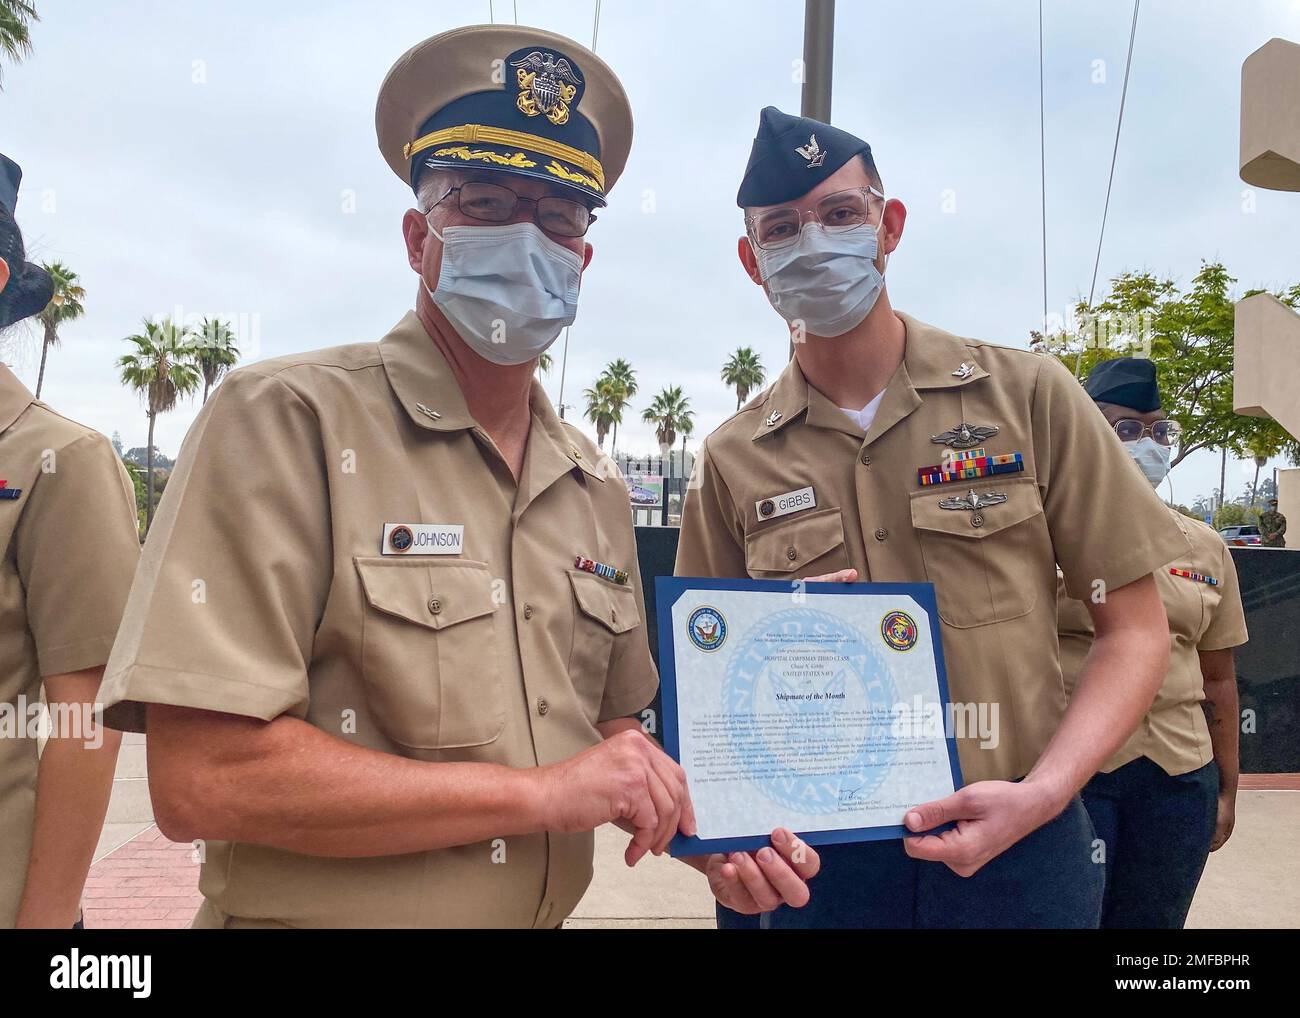 220819-N-XZ205-1009  SAN DIEGO (Aug. 19, 2022) Capt. Jeffery Johnson, Navy Medicine Readiness and Training Command (NMRTC) San Diego’s acting commanding officer (left), awards Hospital Corpsman 3rd Class Chase Gibbs, a Sailor assigned to NMRTC San Diego (right), with a Shipmate of the Month Award during a ceremony at the hospital Aug. 19. With input from NMRTC San Diego directorates’ chain of command, Shipmate of the Month honors Sailors who perform their duties exceptionally well. NMRTC San Diego's mission is to prepare service members to deploy in support of operational forces, deliver high Stock Photo